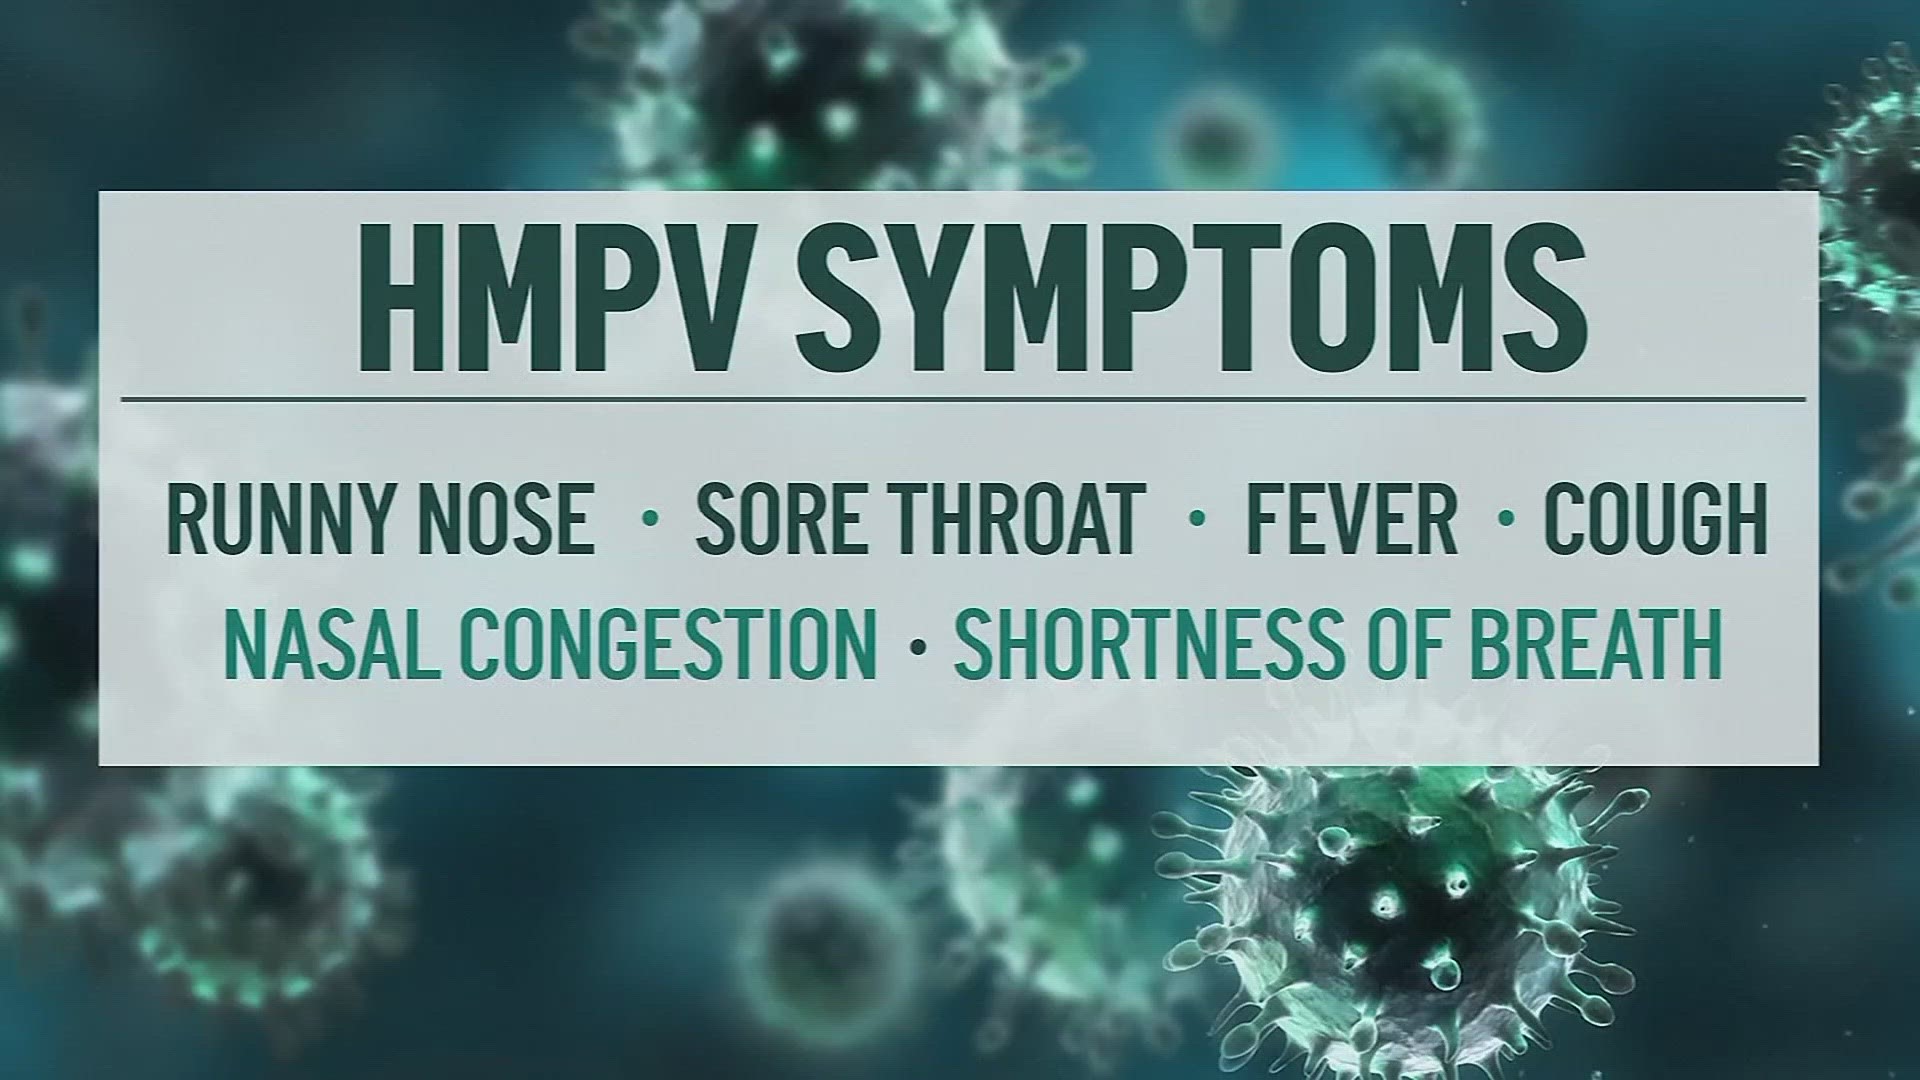 The virus causes many of the same symptoms as COVID, like a cough and sore throat. Here's more on what we know.